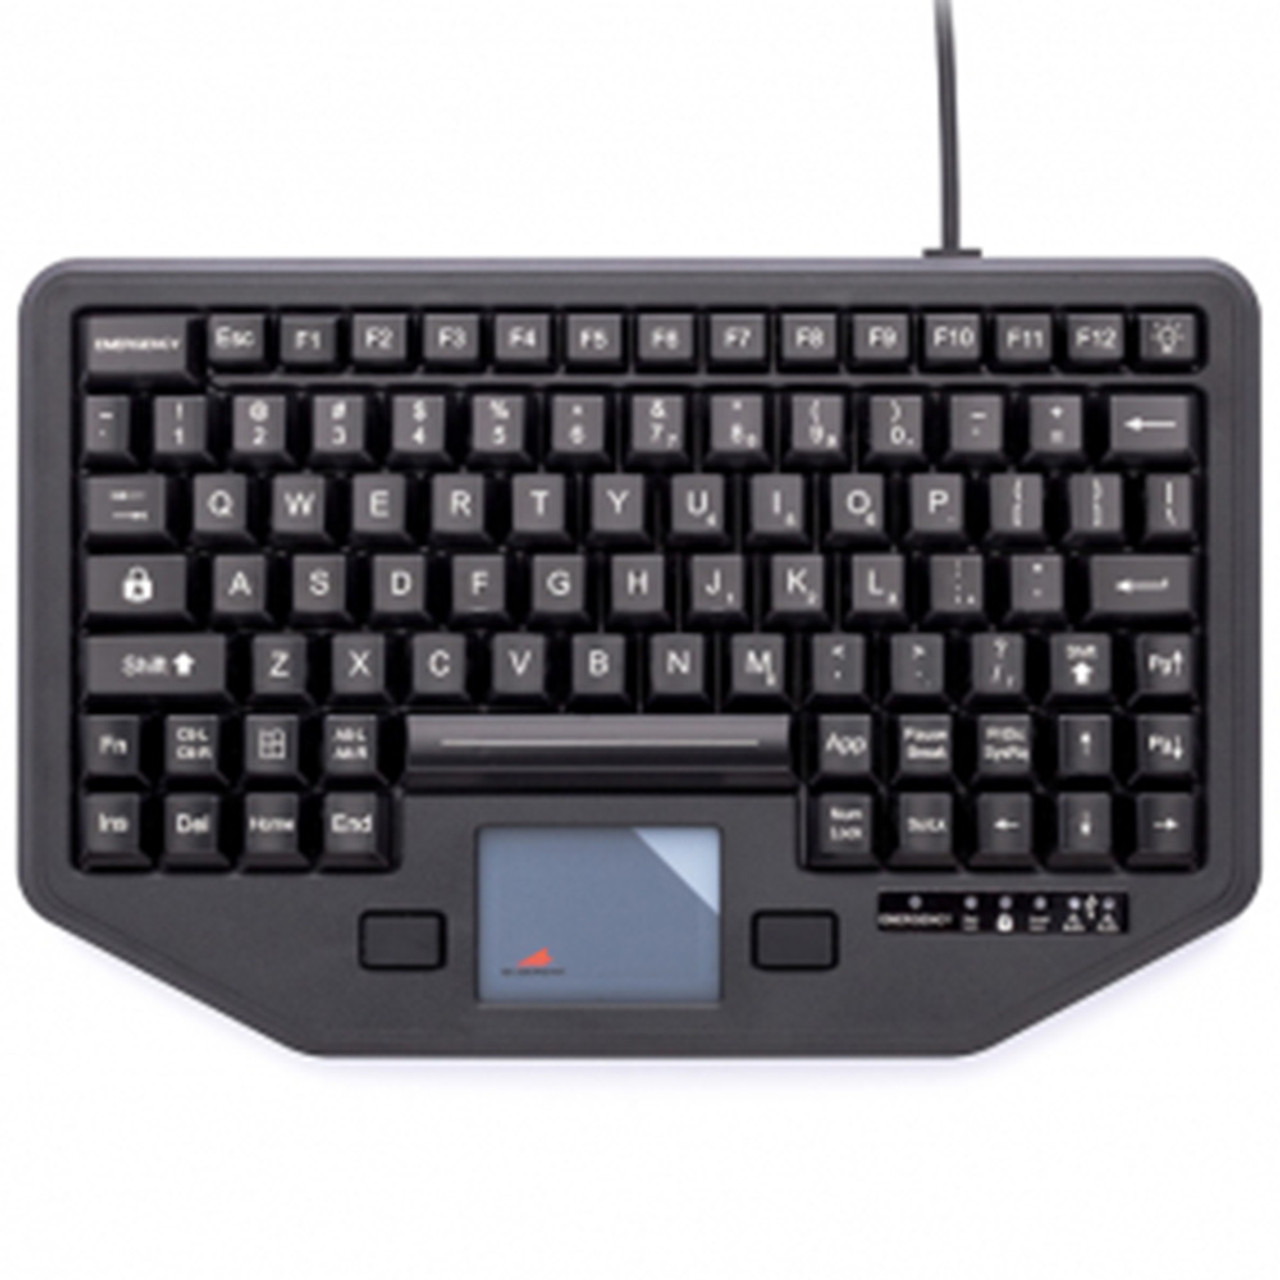 Gamber Johnson 7300-0084 iKey Full Travel Keyboard with Attachment Versatility, Green Back Lighting, Emergency Key, Integrated Touchpad, Mobile Mounting Holes, and Humidity Resistant